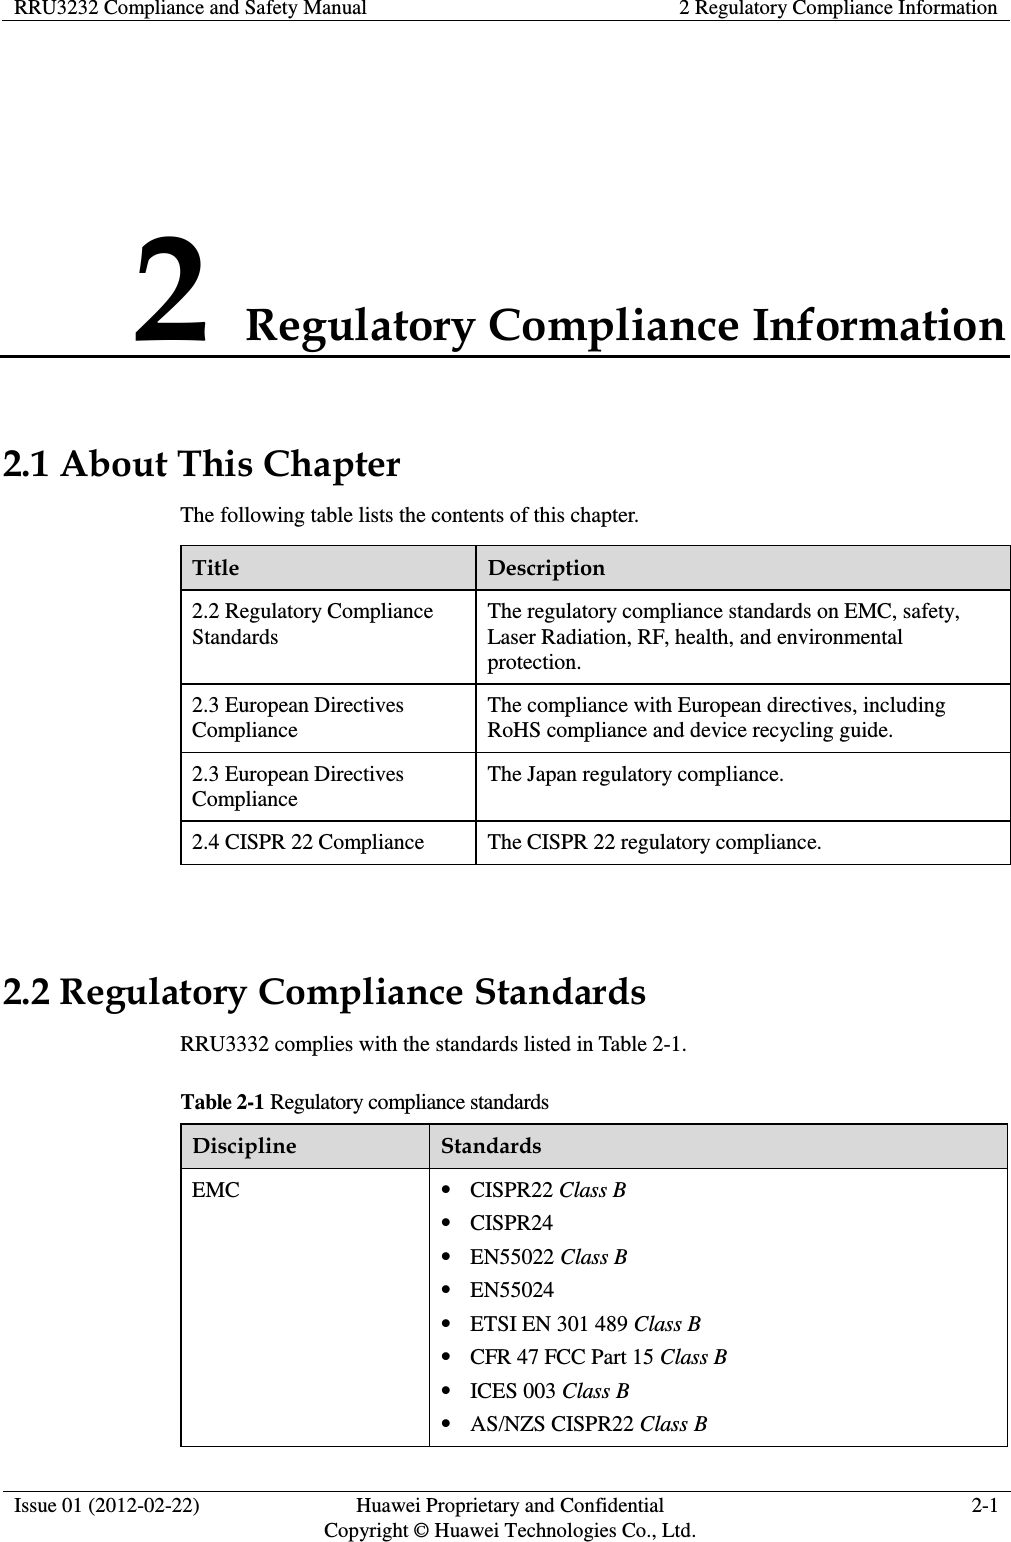 RRU3232 Compliance and Safety Manual 2 Regulatory Compliance Information  Issue 01 (2012-02-22) Huawei Proprietary and Confidential         Copyright © Huawei Technologies Co., Ltd. 2-1  2 Regulatory Compliance Information 2.1 About This Chapter The following table lists the contents of this chapter. Title Description 2.2 Regulatory Compliance Standards The regulatory compliance standards on EMC, safety, Laser Radiation, RF, health, and environmental protection. 2.3 European Directives Compliance The compliance with European directives, including RoHS compliance and device recycling guide. 2.3 European Directives Compliance   The Japan regulatory compliance. 2.4 CISPR 22 Compliance The CISPR 22 regulatory compliance.  2.2 Regulatory Compliance Standards RRU3332 complies with the standards listed in Table 2-1. Table 2-1 Regulatory compliance standards Discipline Standards EMC  CISPR22 Class B  CISPR24  EN55022 Class B  EN55024  ETSI EN 301 489 Class B  CFR 47 FCC Part 15 Class B  ICES 003 Class B  AS/NZS CISPR22 Class B 